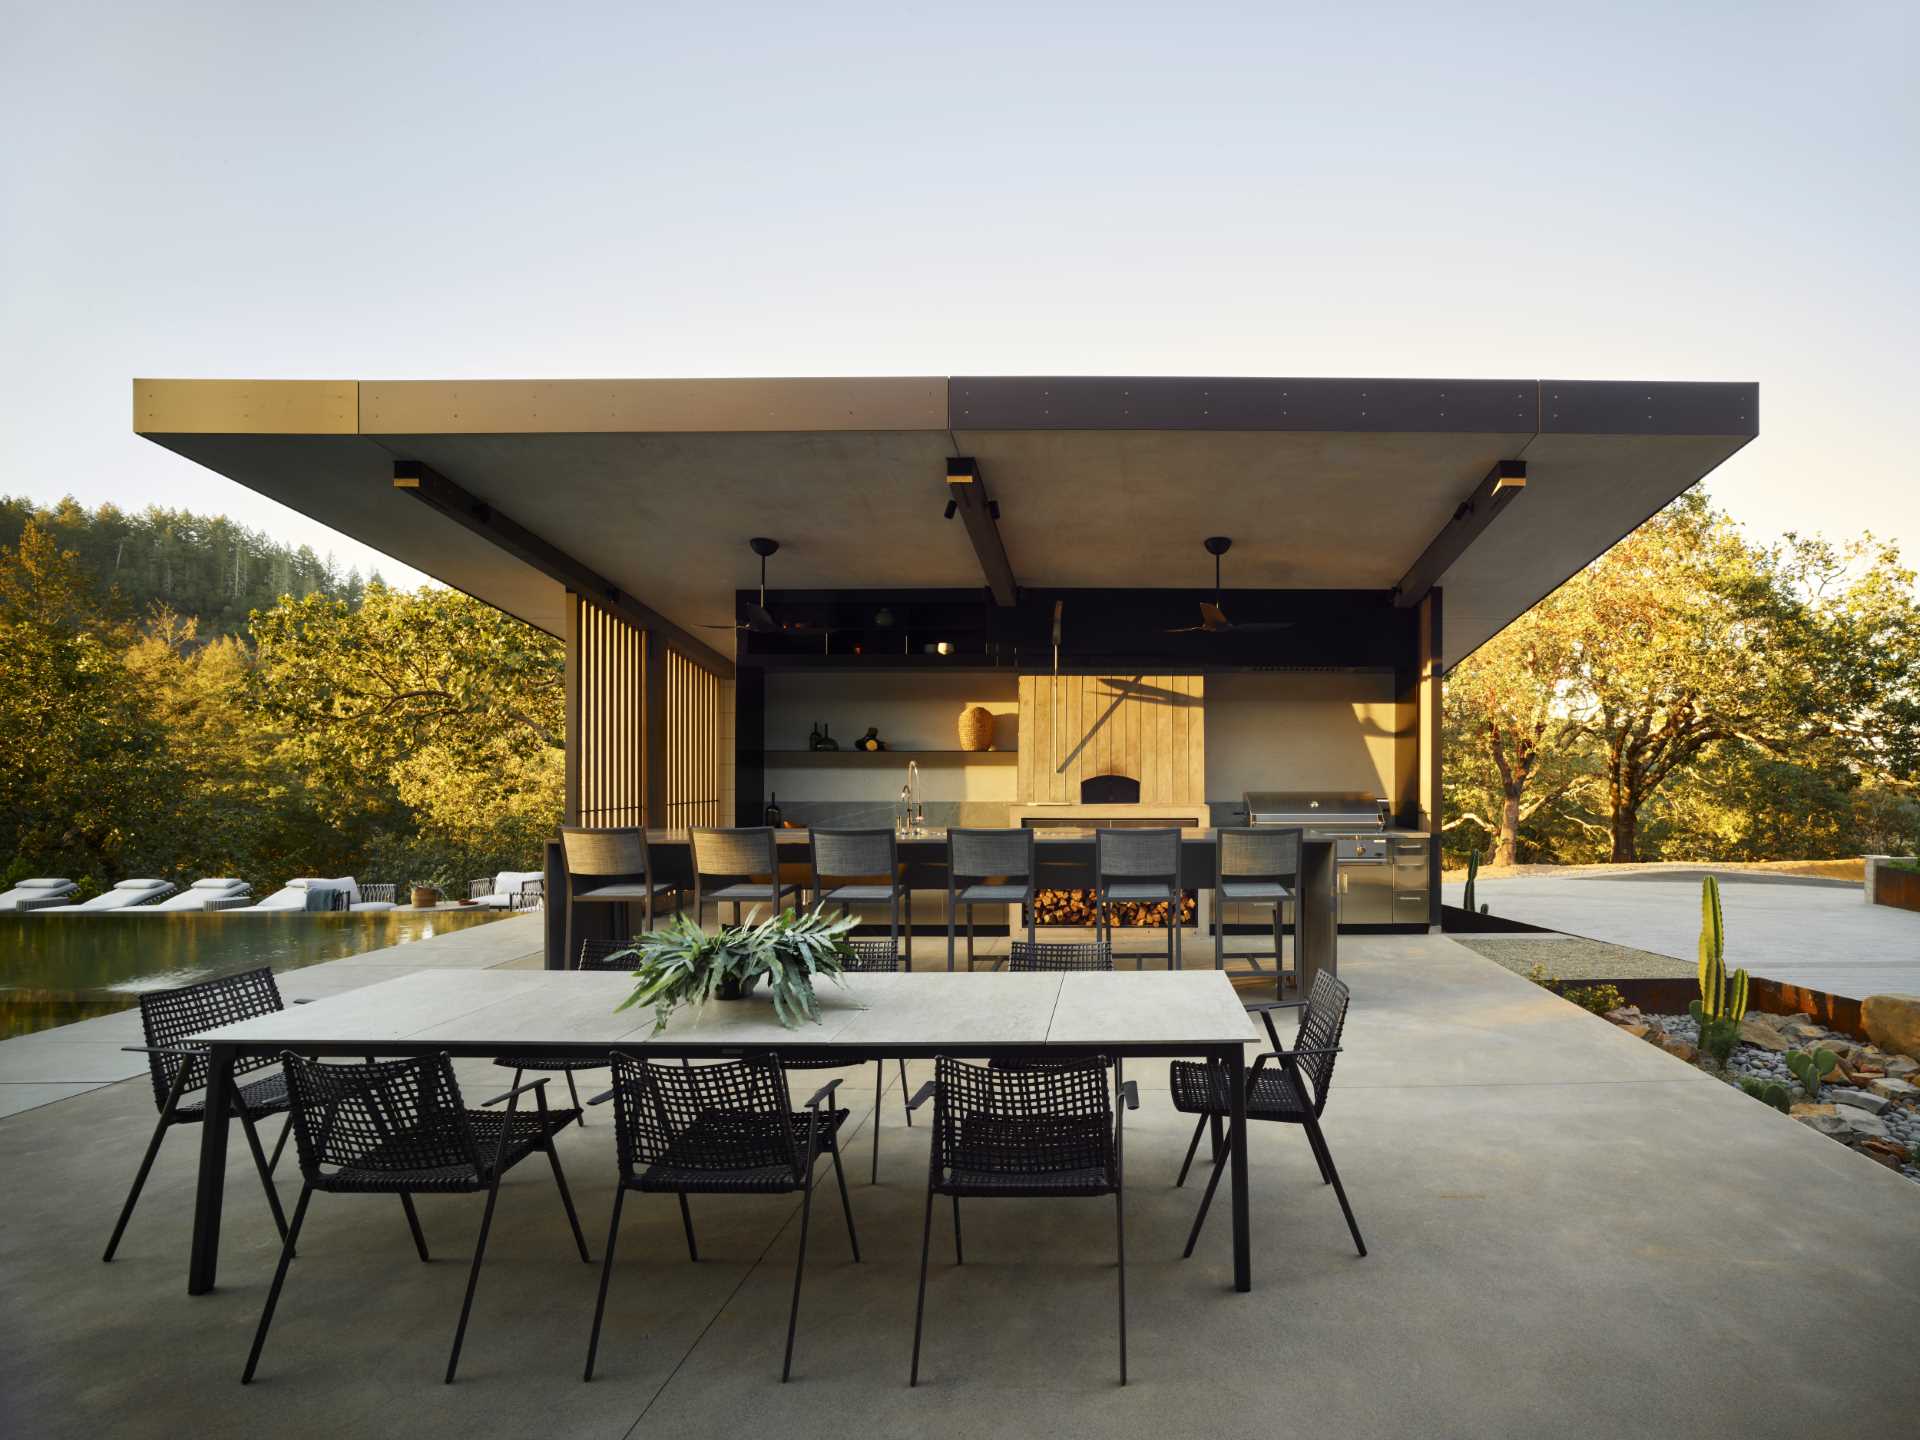 A modern home with a pitched ceiling, exposed wood beams, and expansive outdoor living spaces.